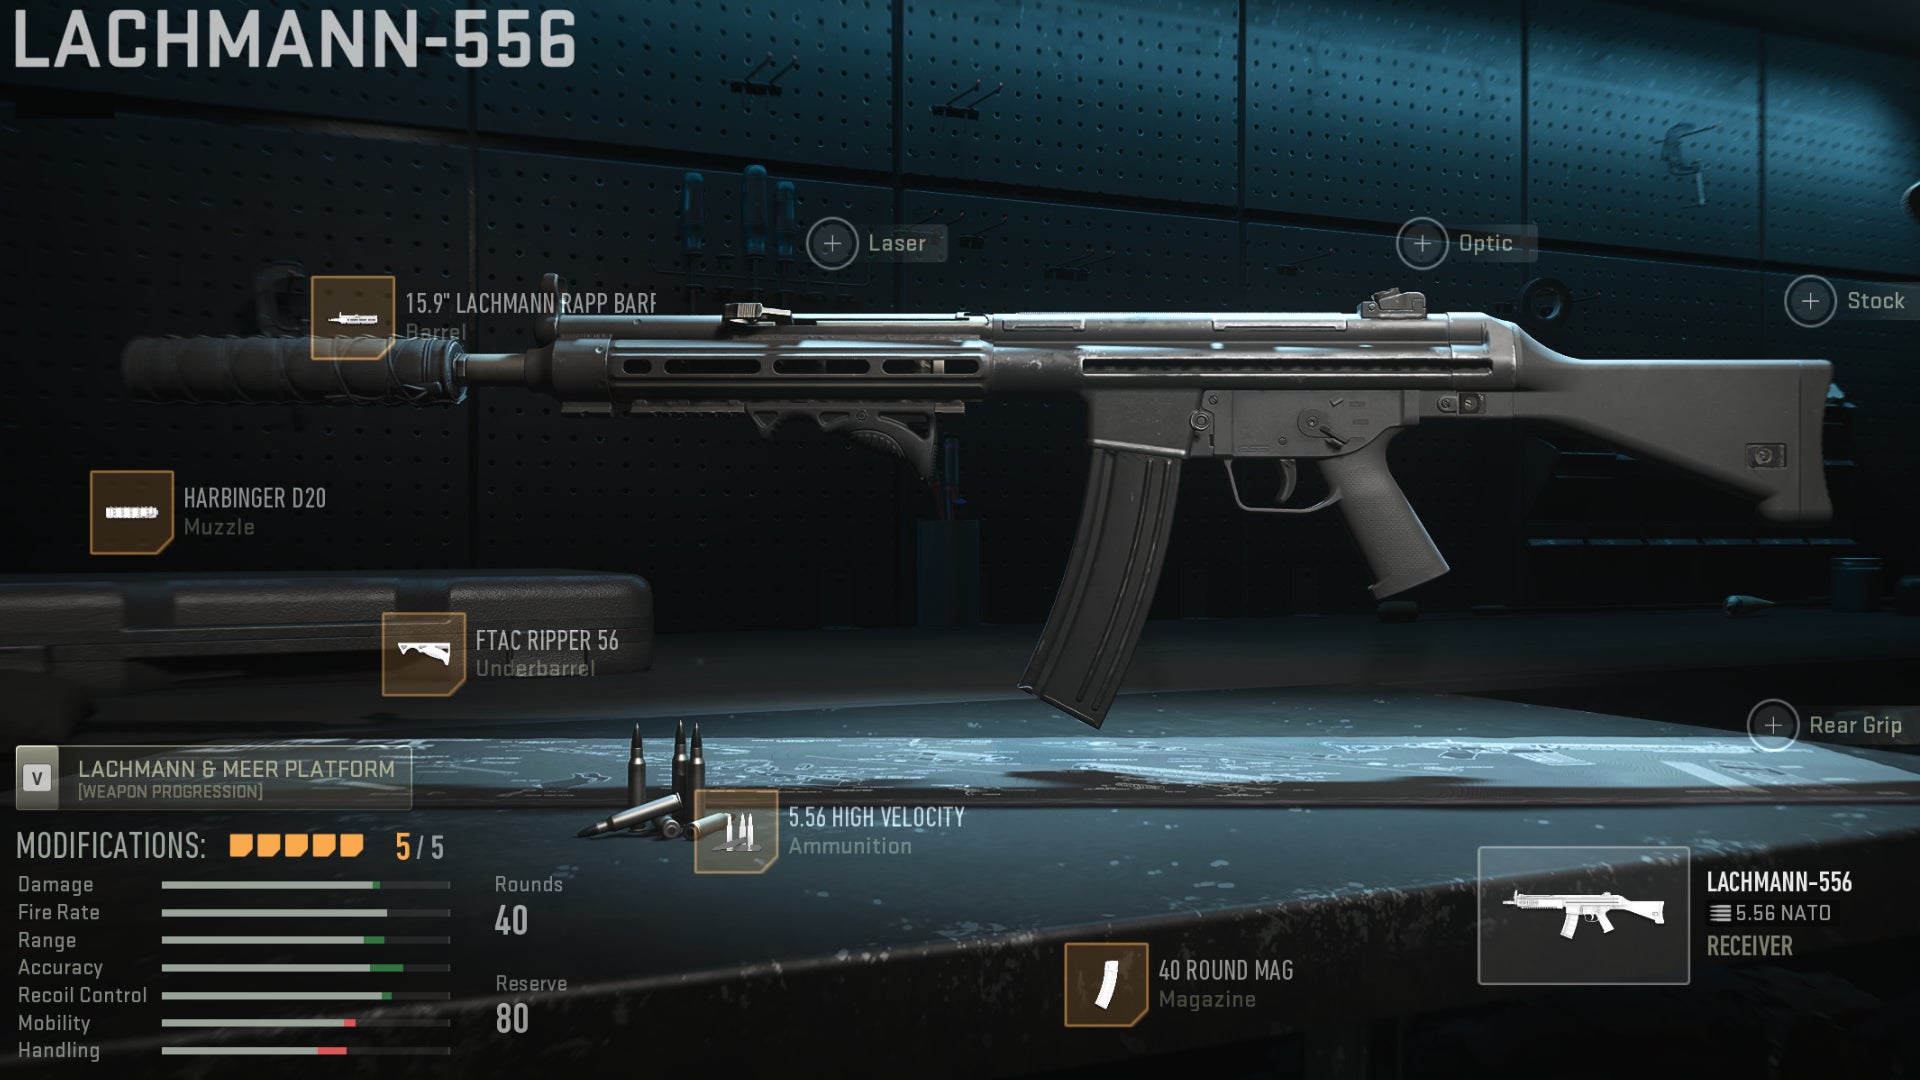 The Lachmann-556 in the Warzone 2 Gunsmith screen, with the attachments required for the best Lachmann-556 loadout applied.